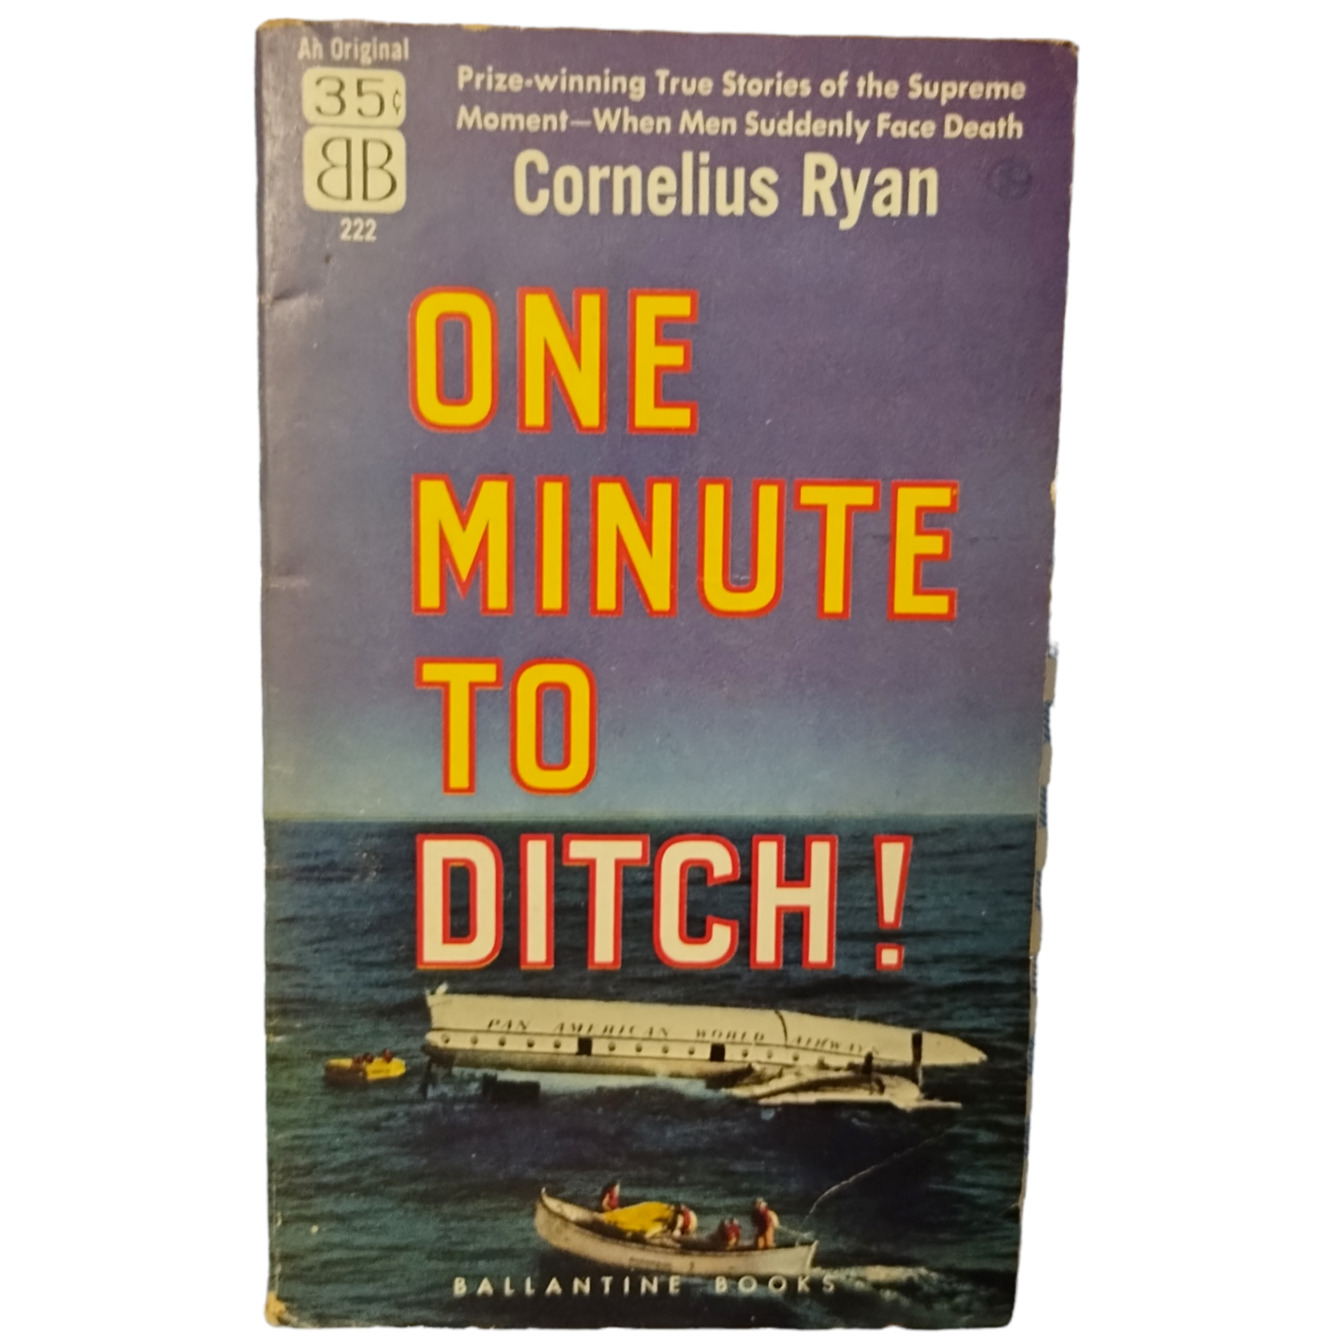 One Minute to Ditch by Cornelius Ryan Ballantine Book 222 Vintage 1957 Paperback